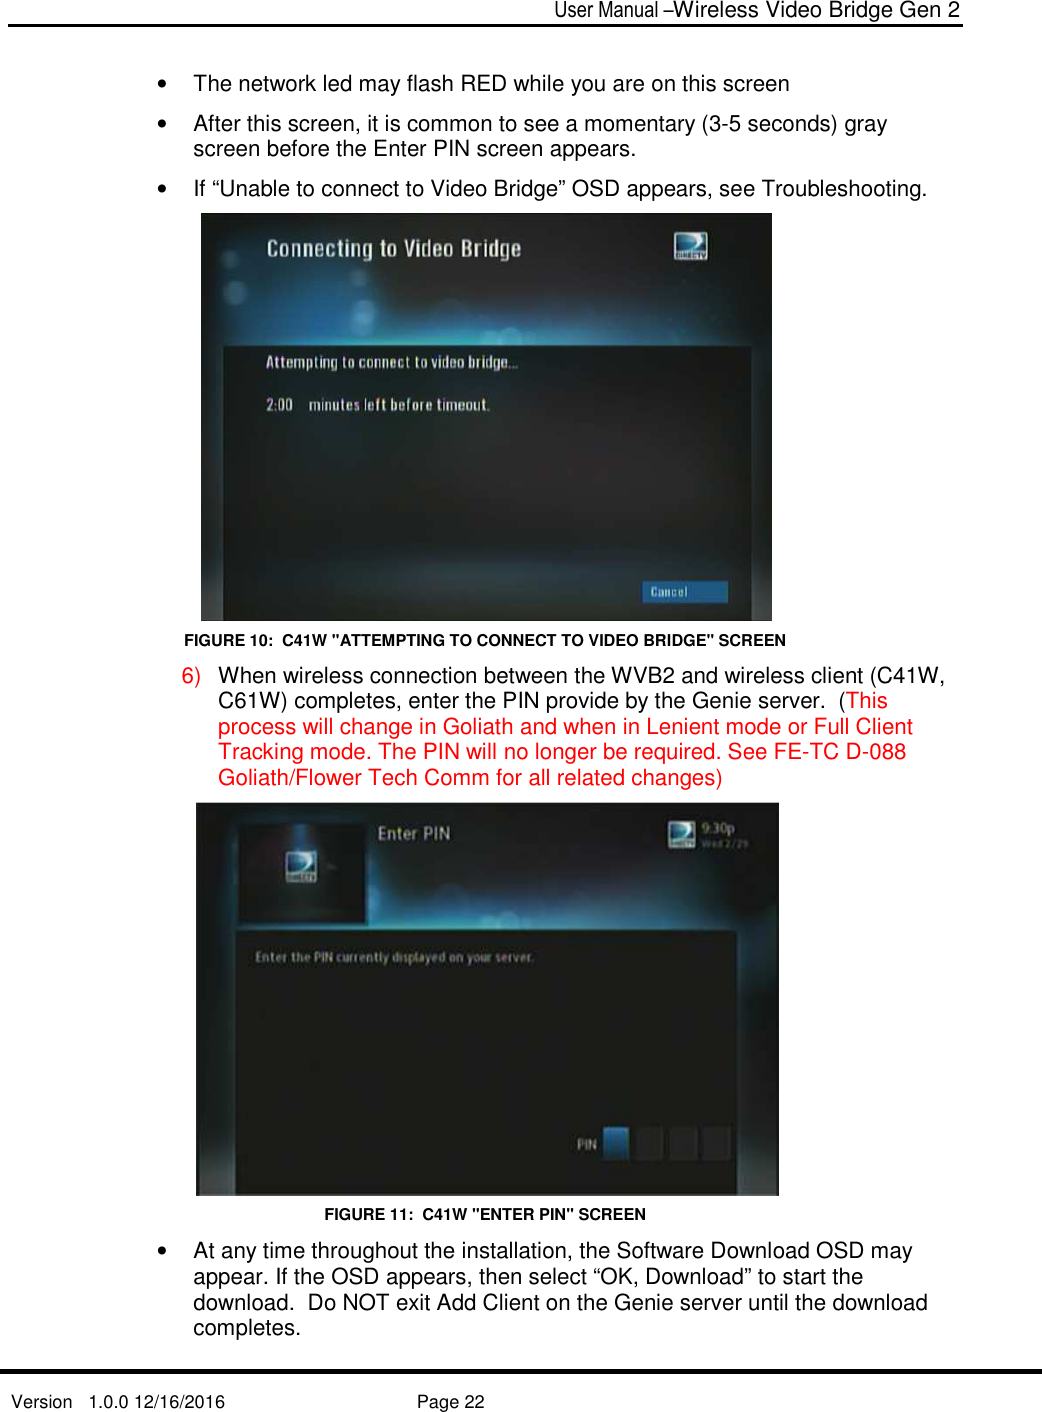  User Manual –Wireless Video Bridge Gen 2  Version   1.0.0 12/16/2016     Page 22   •  The network led may flash RED while you are on this screen •  After this screen, it is common to see a momentary (3-5 seconds) gray screen before the Enter PIN screen appears. •  If “Unable to connect to Video Bridge” OSD appears, see Troubleshooting.  FIGURE 10:  C41W &quot;ATTEMPTING TO CONNECT TO VIDEO BRIDGE&quot; SCREEN 6)  When wireless connection between the WVB2 and wireless client (C41W, C61W) completes, enter the PIN provide by the Genie server.  (This process will change in Goliath and when in Lenient mode or Full Client Tracking mode. The PIN will no longer be required. See FE-TC D-088 Goliath/Flower Tech Comm for all related changes)  FIGURE 11:  C41W &quot;ENTER PIN&quot; SCREEN •  At any time throughout the installation, the Software Download OSD may appear. If the OSD appears, then select “OK, Download” to start the download.  Do NOT exit Add Client on the Genie server until the download completes.  